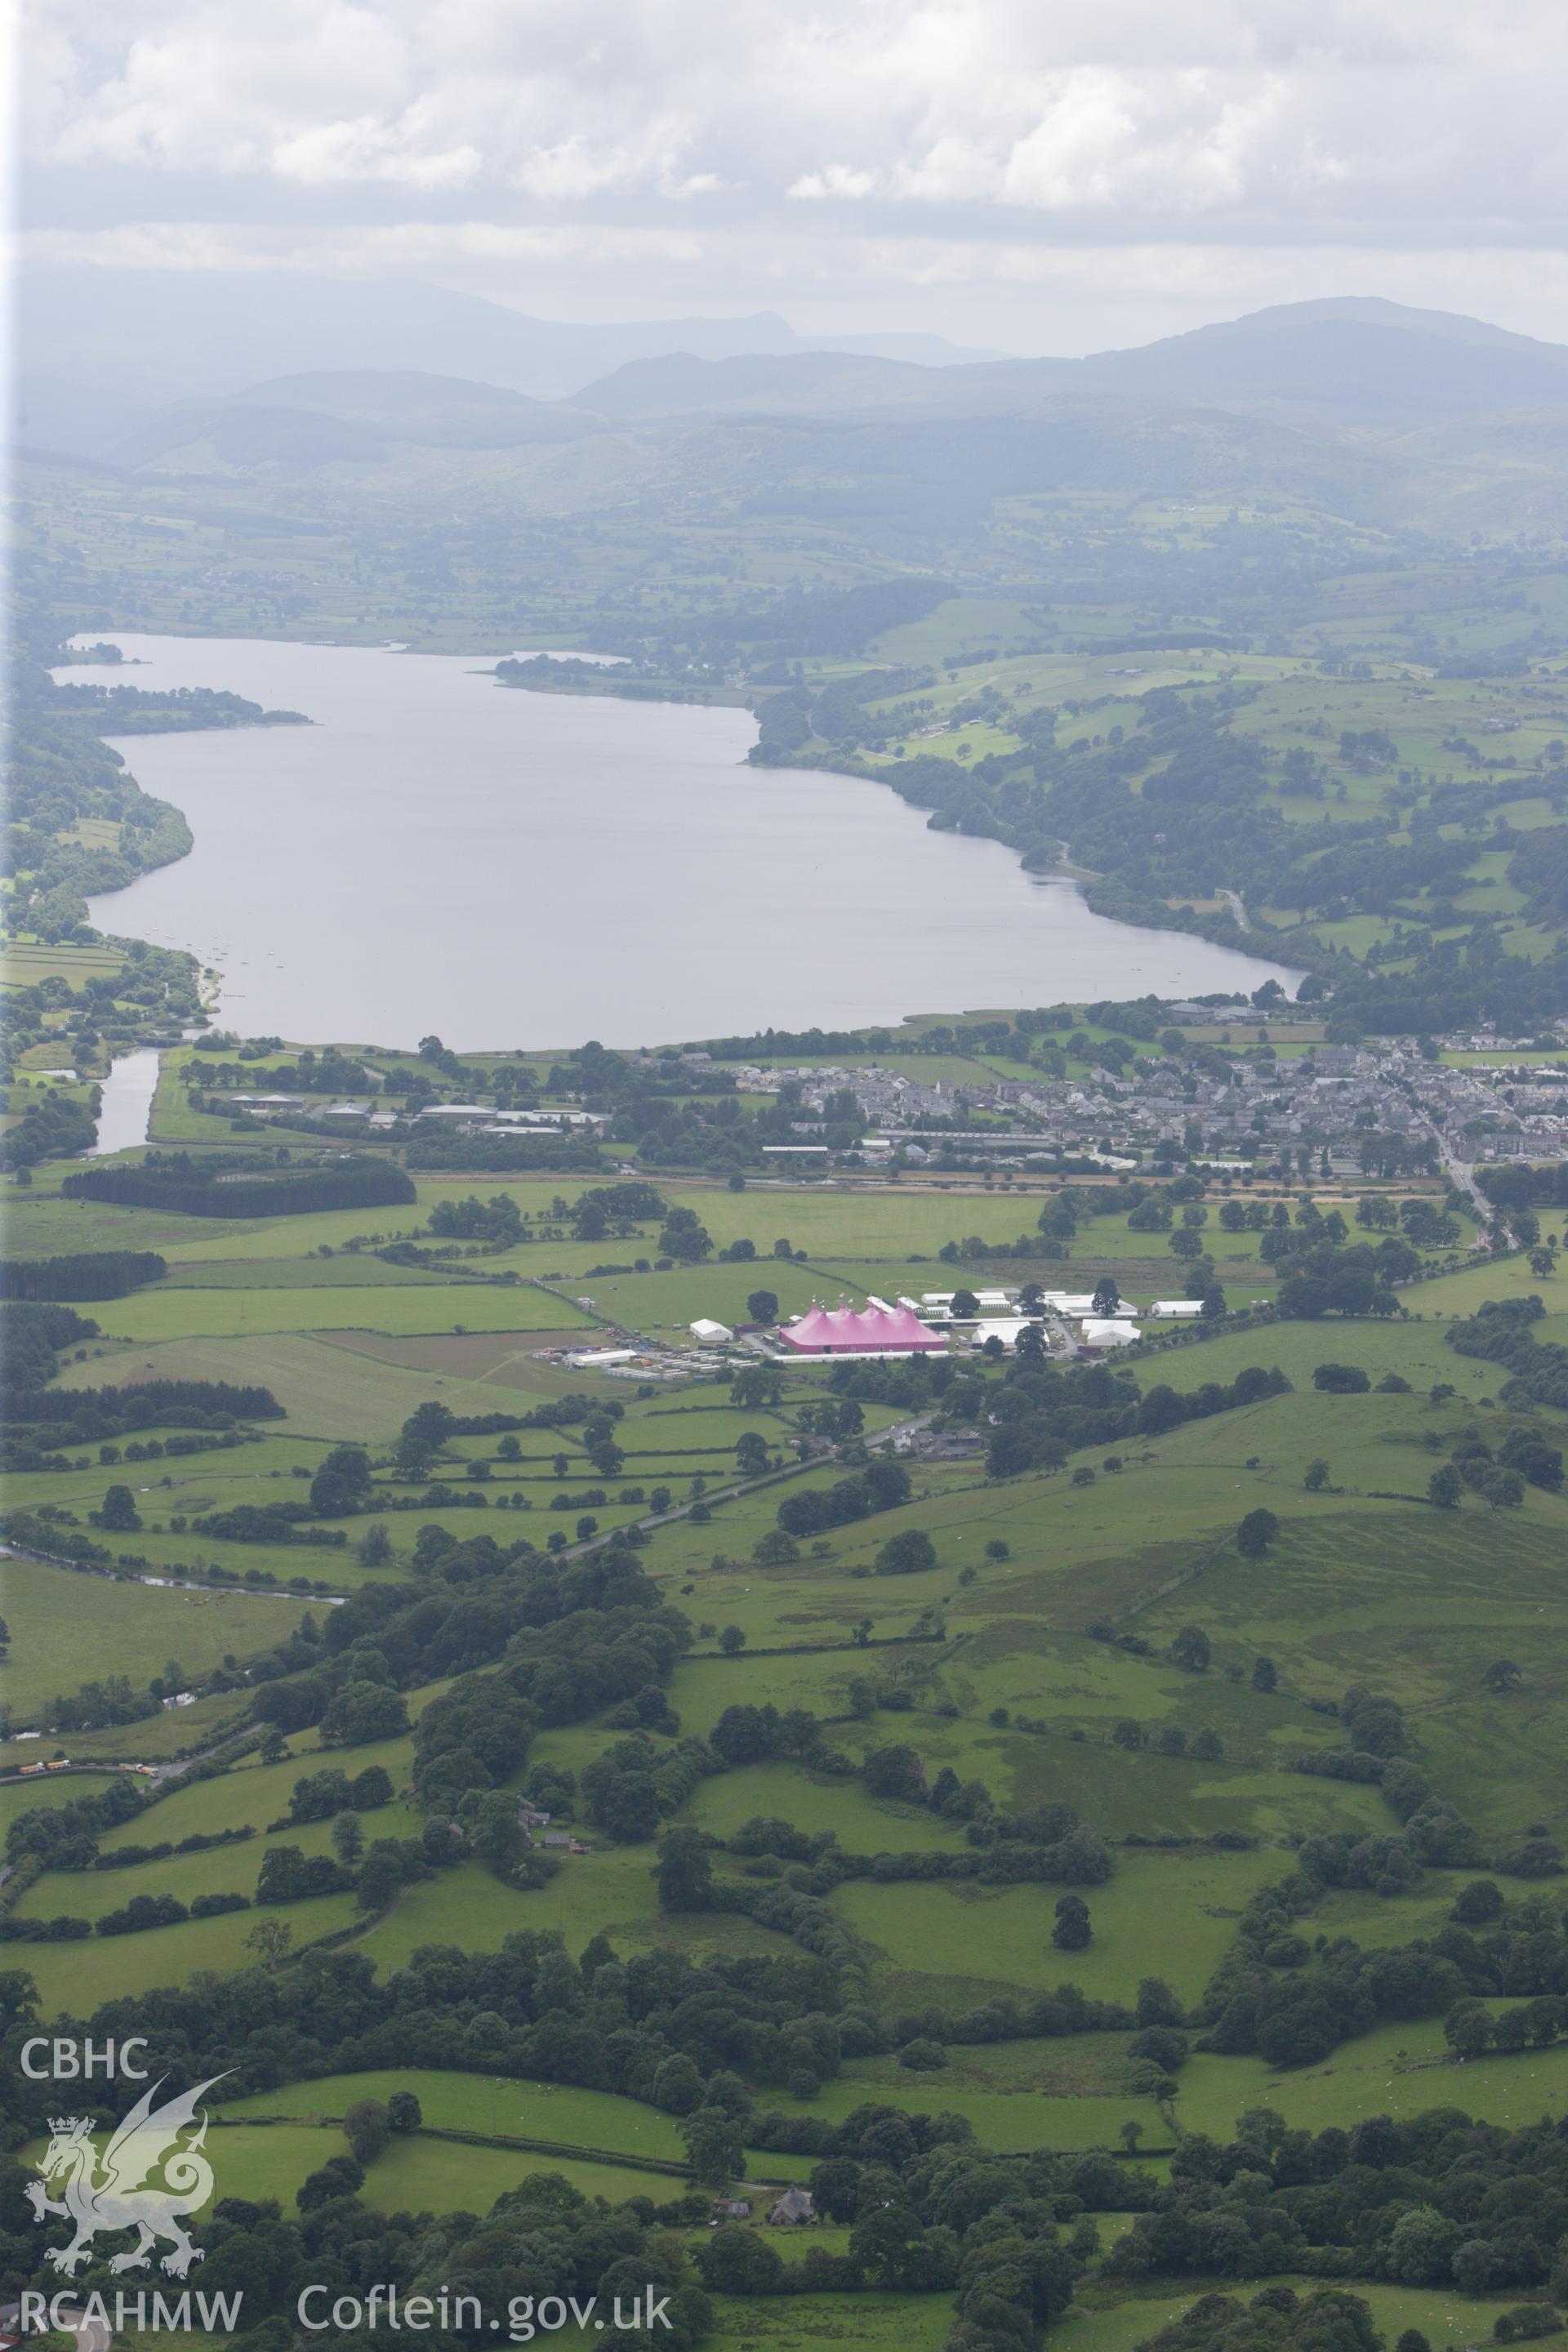 RCAHMW colour oblique aerial photograph of Llyn Tegid (Bala Lake), viewed from the north-east. Taken on 08 July 2009 by Toby Driver